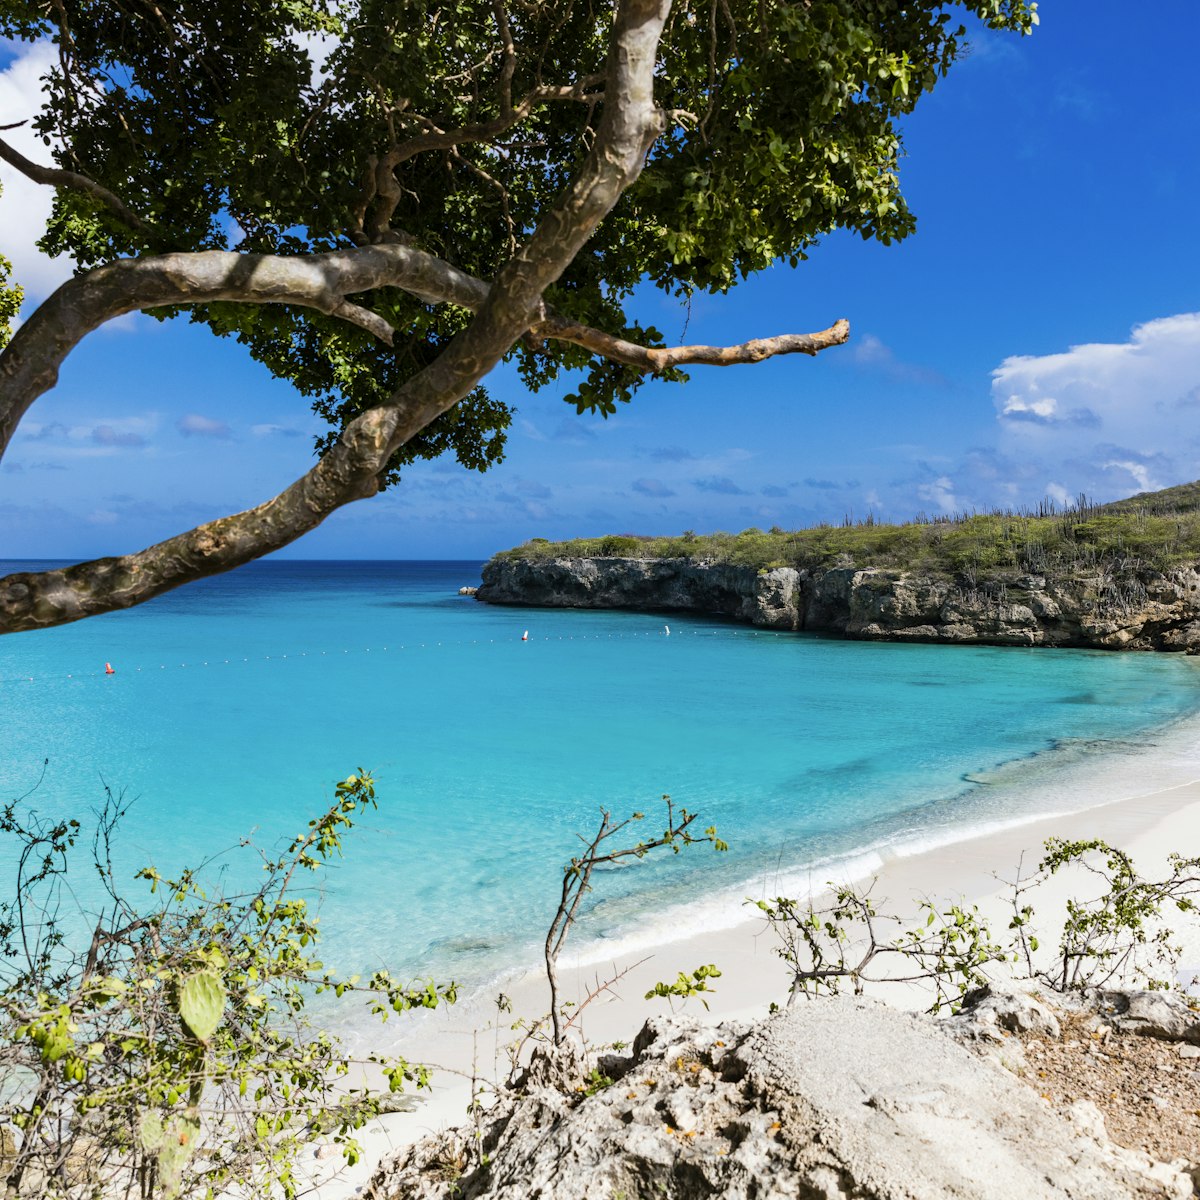 The pristine Grote Knip beach on the tropical Caribbean Island of Curacao